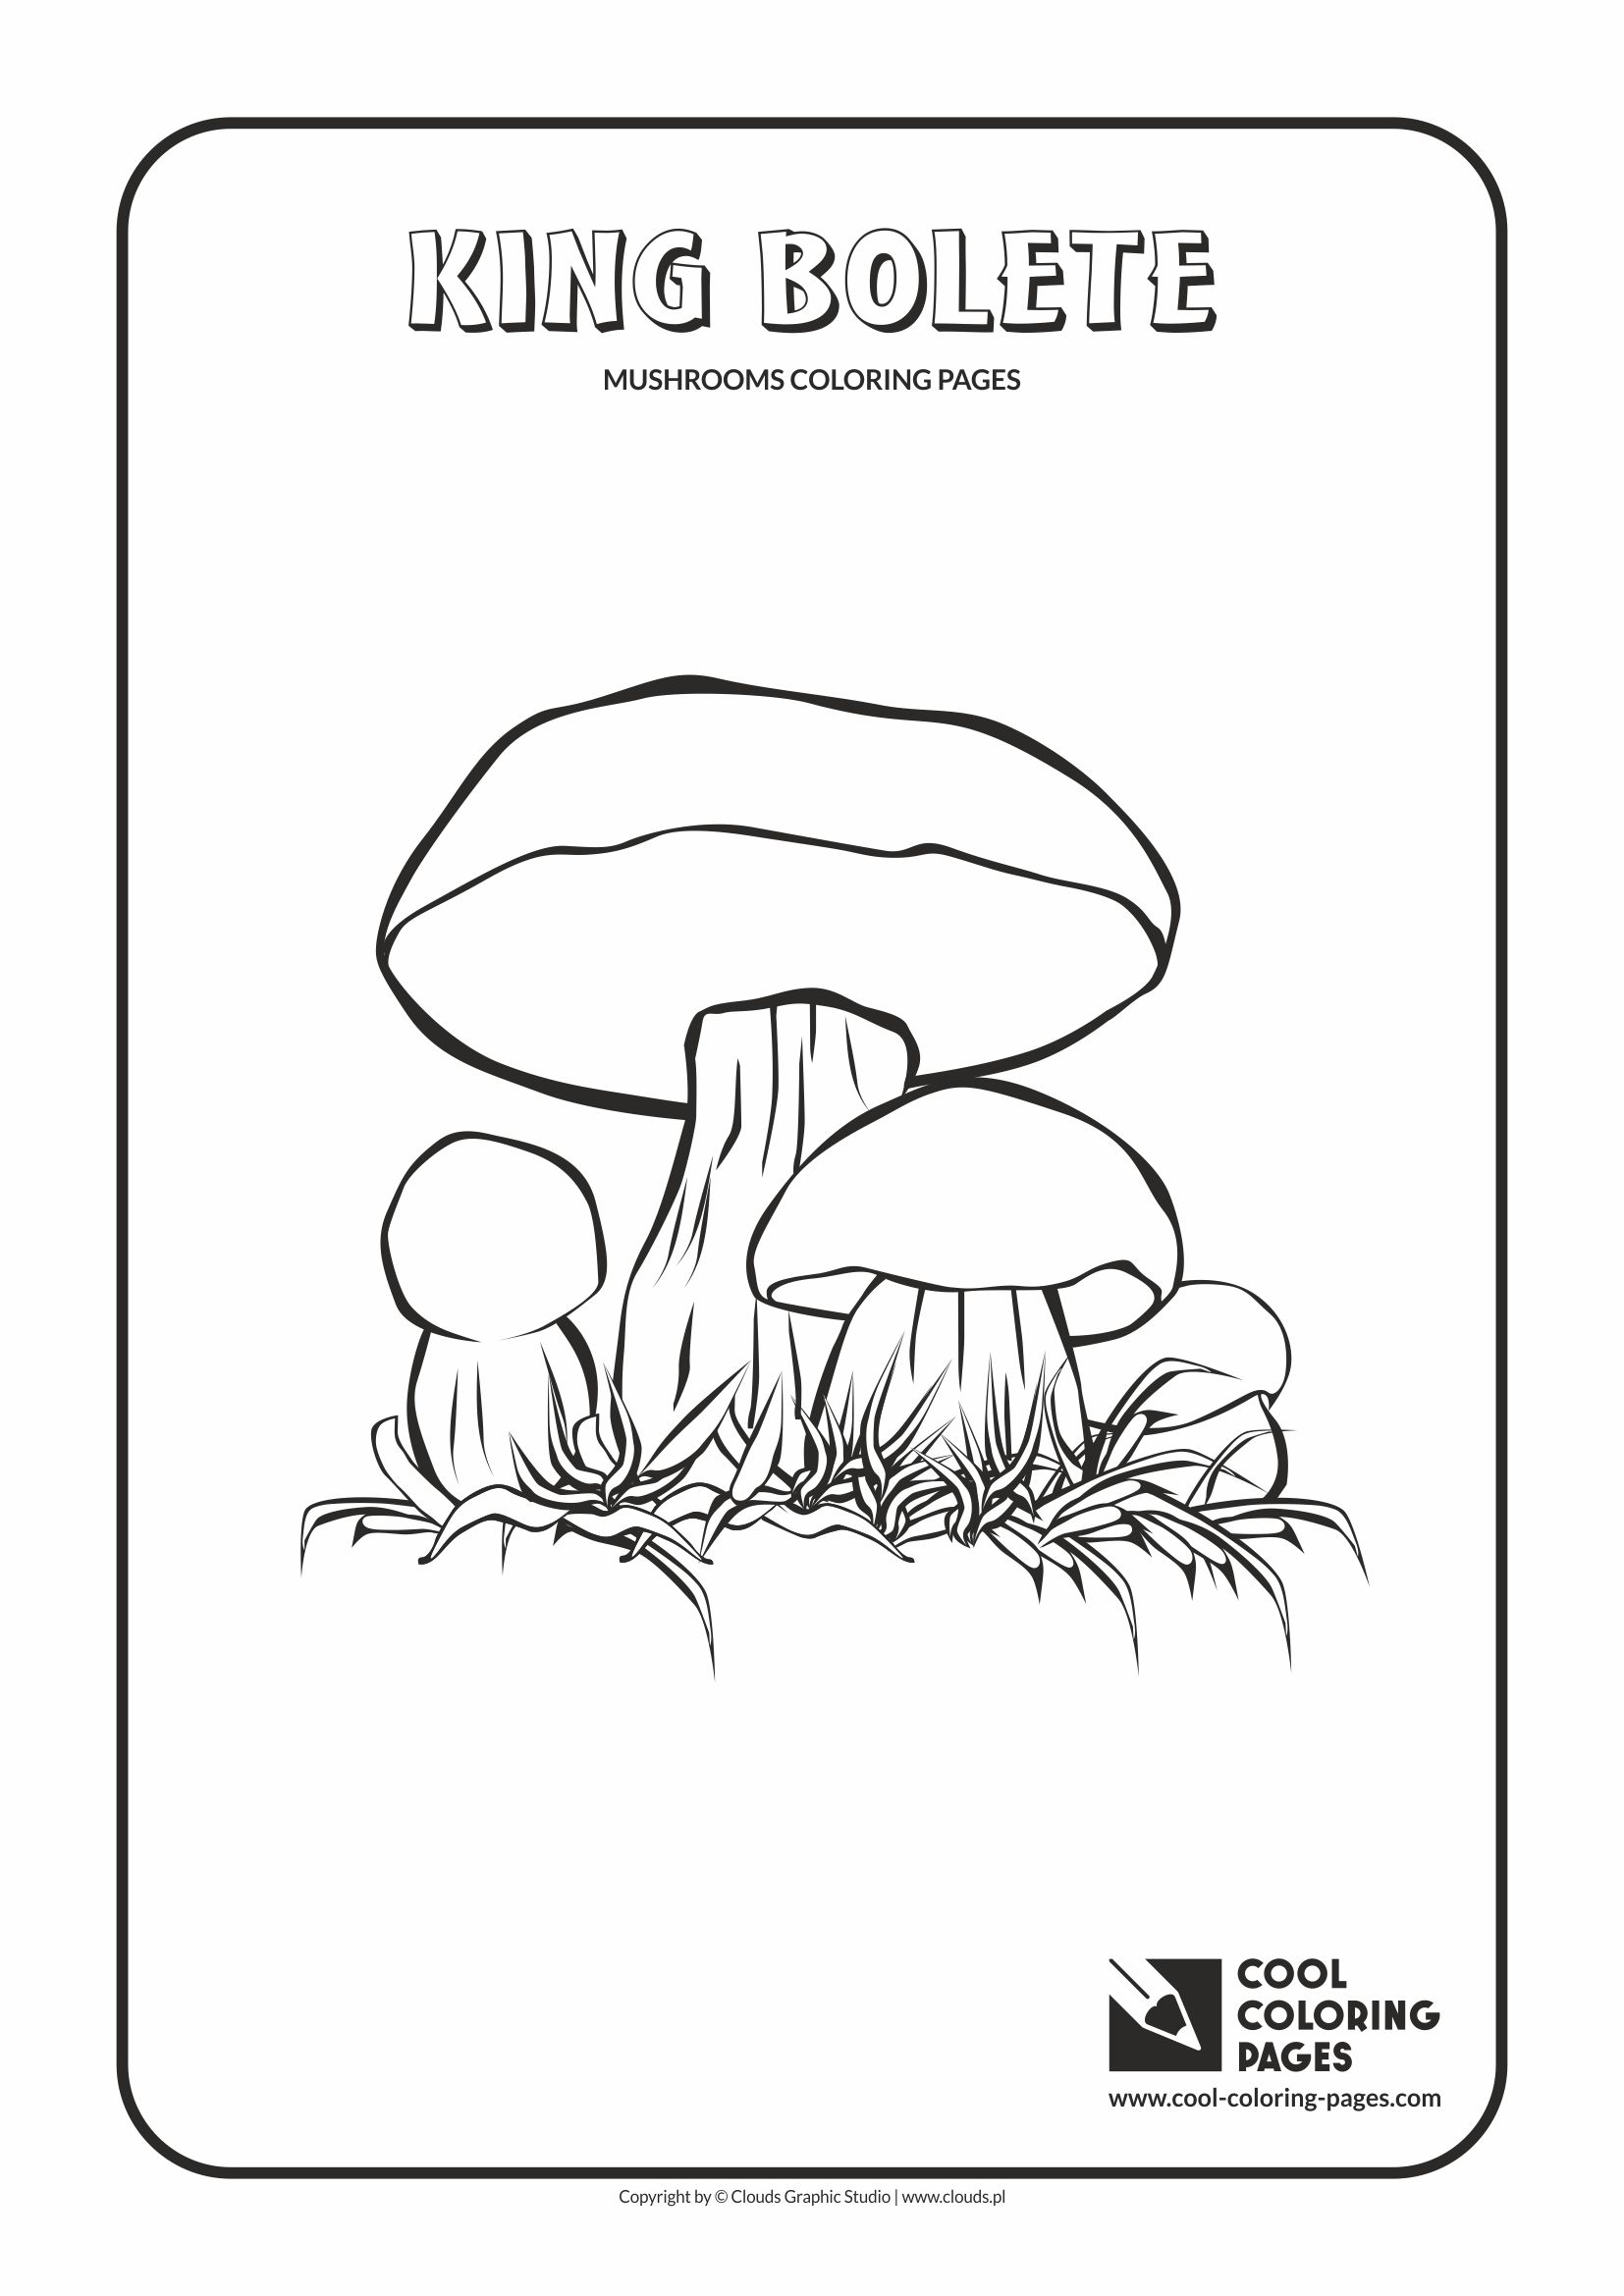 Cool Coloring Pages - Mushrooms / King bolete / Coloring page with king bolete